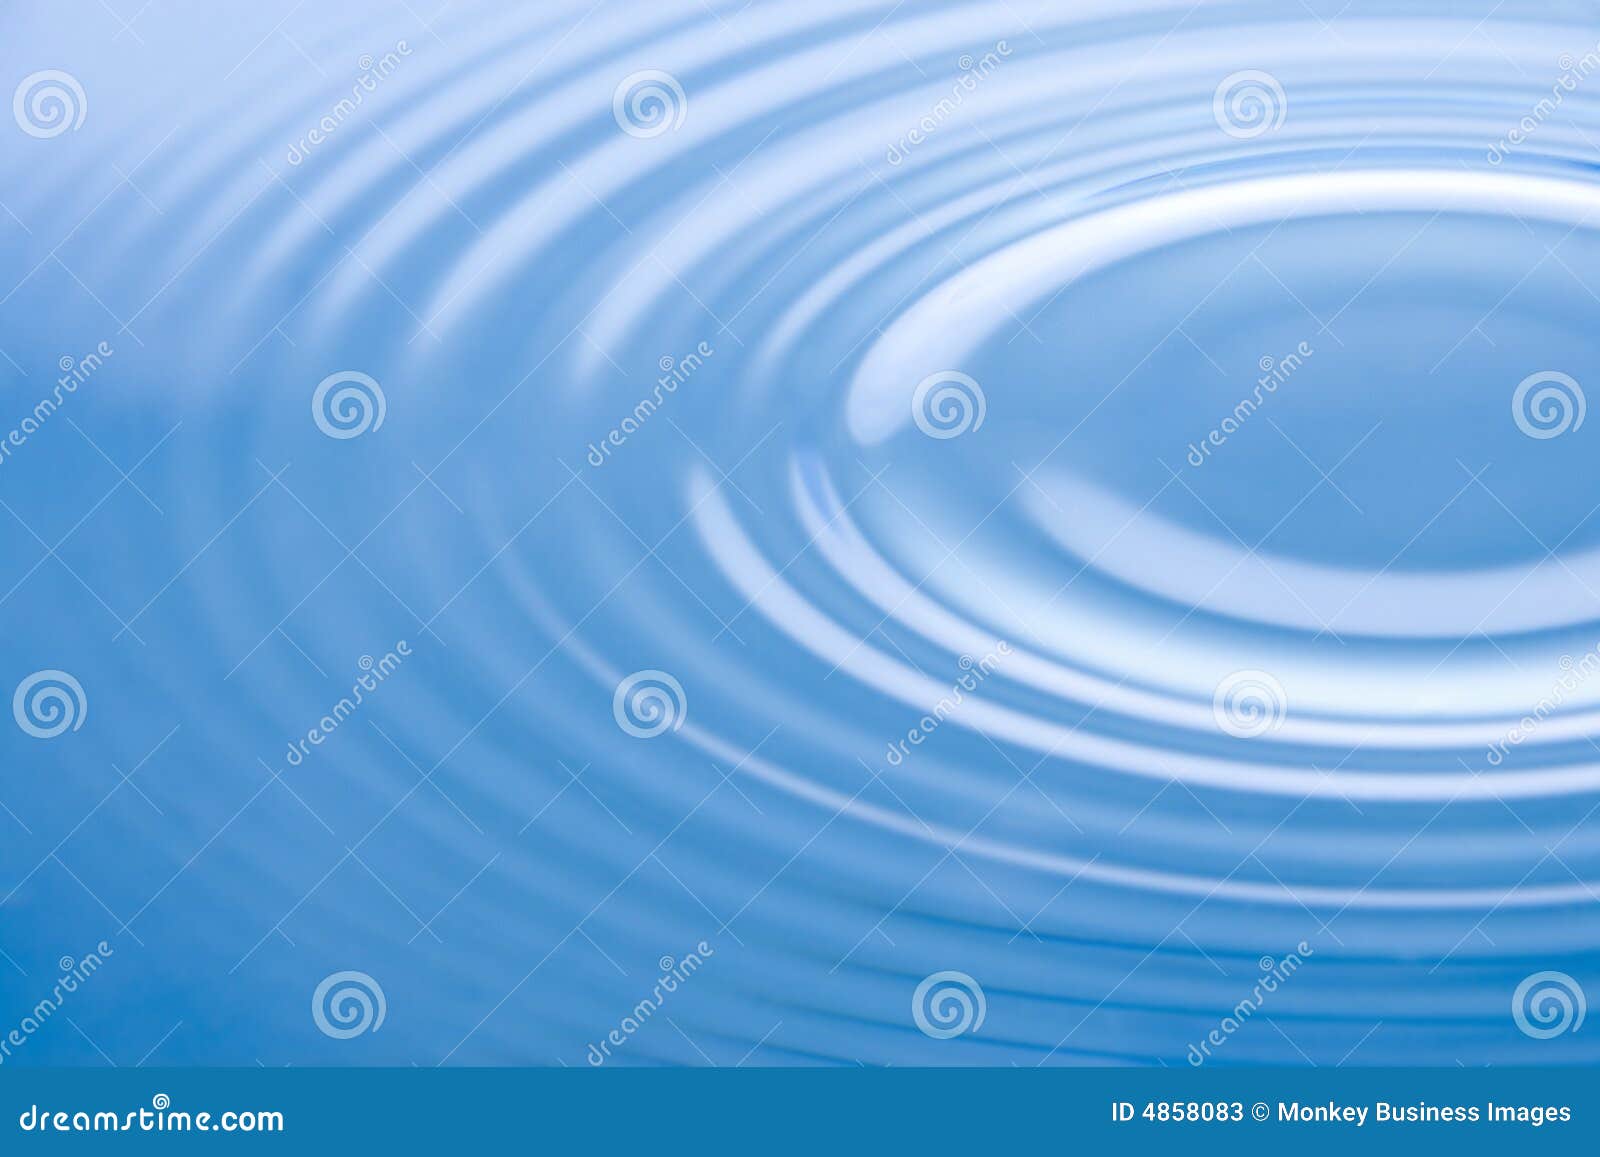 close-up of water ripple